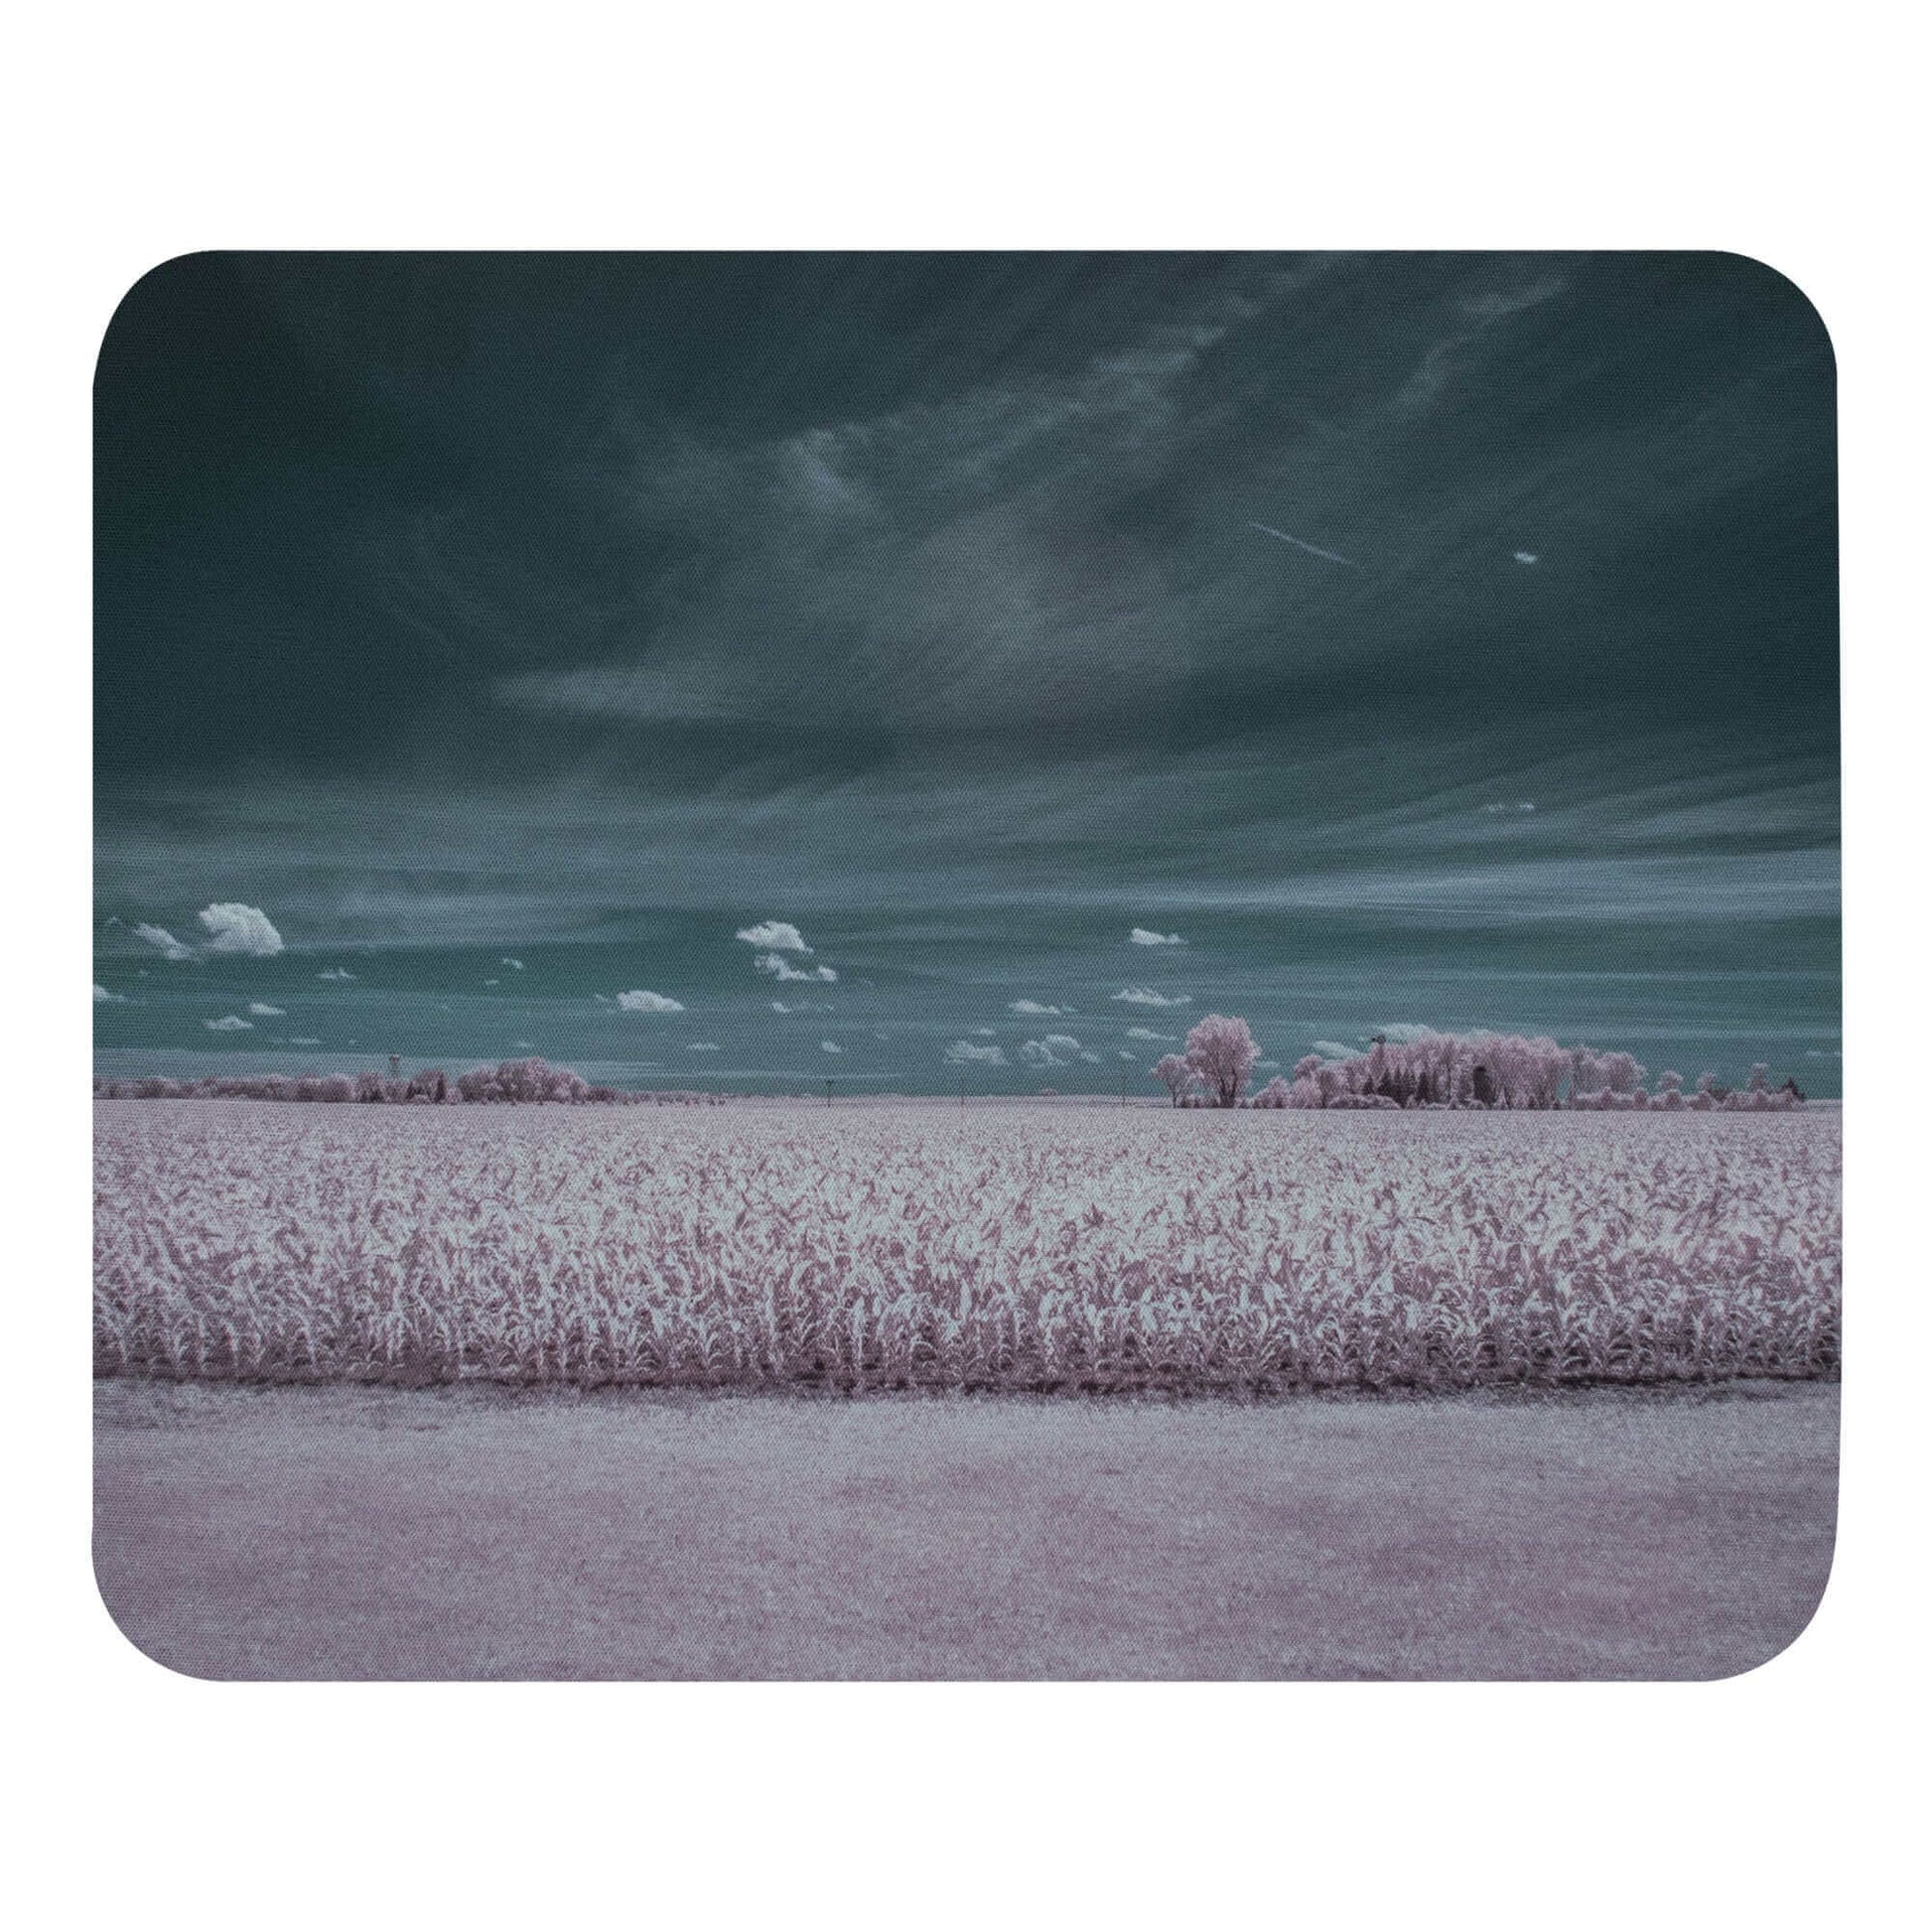 Infrared photo of a corn of field in July - Mouse pad alien corn farm field of corn infra red infrared IR photo summer